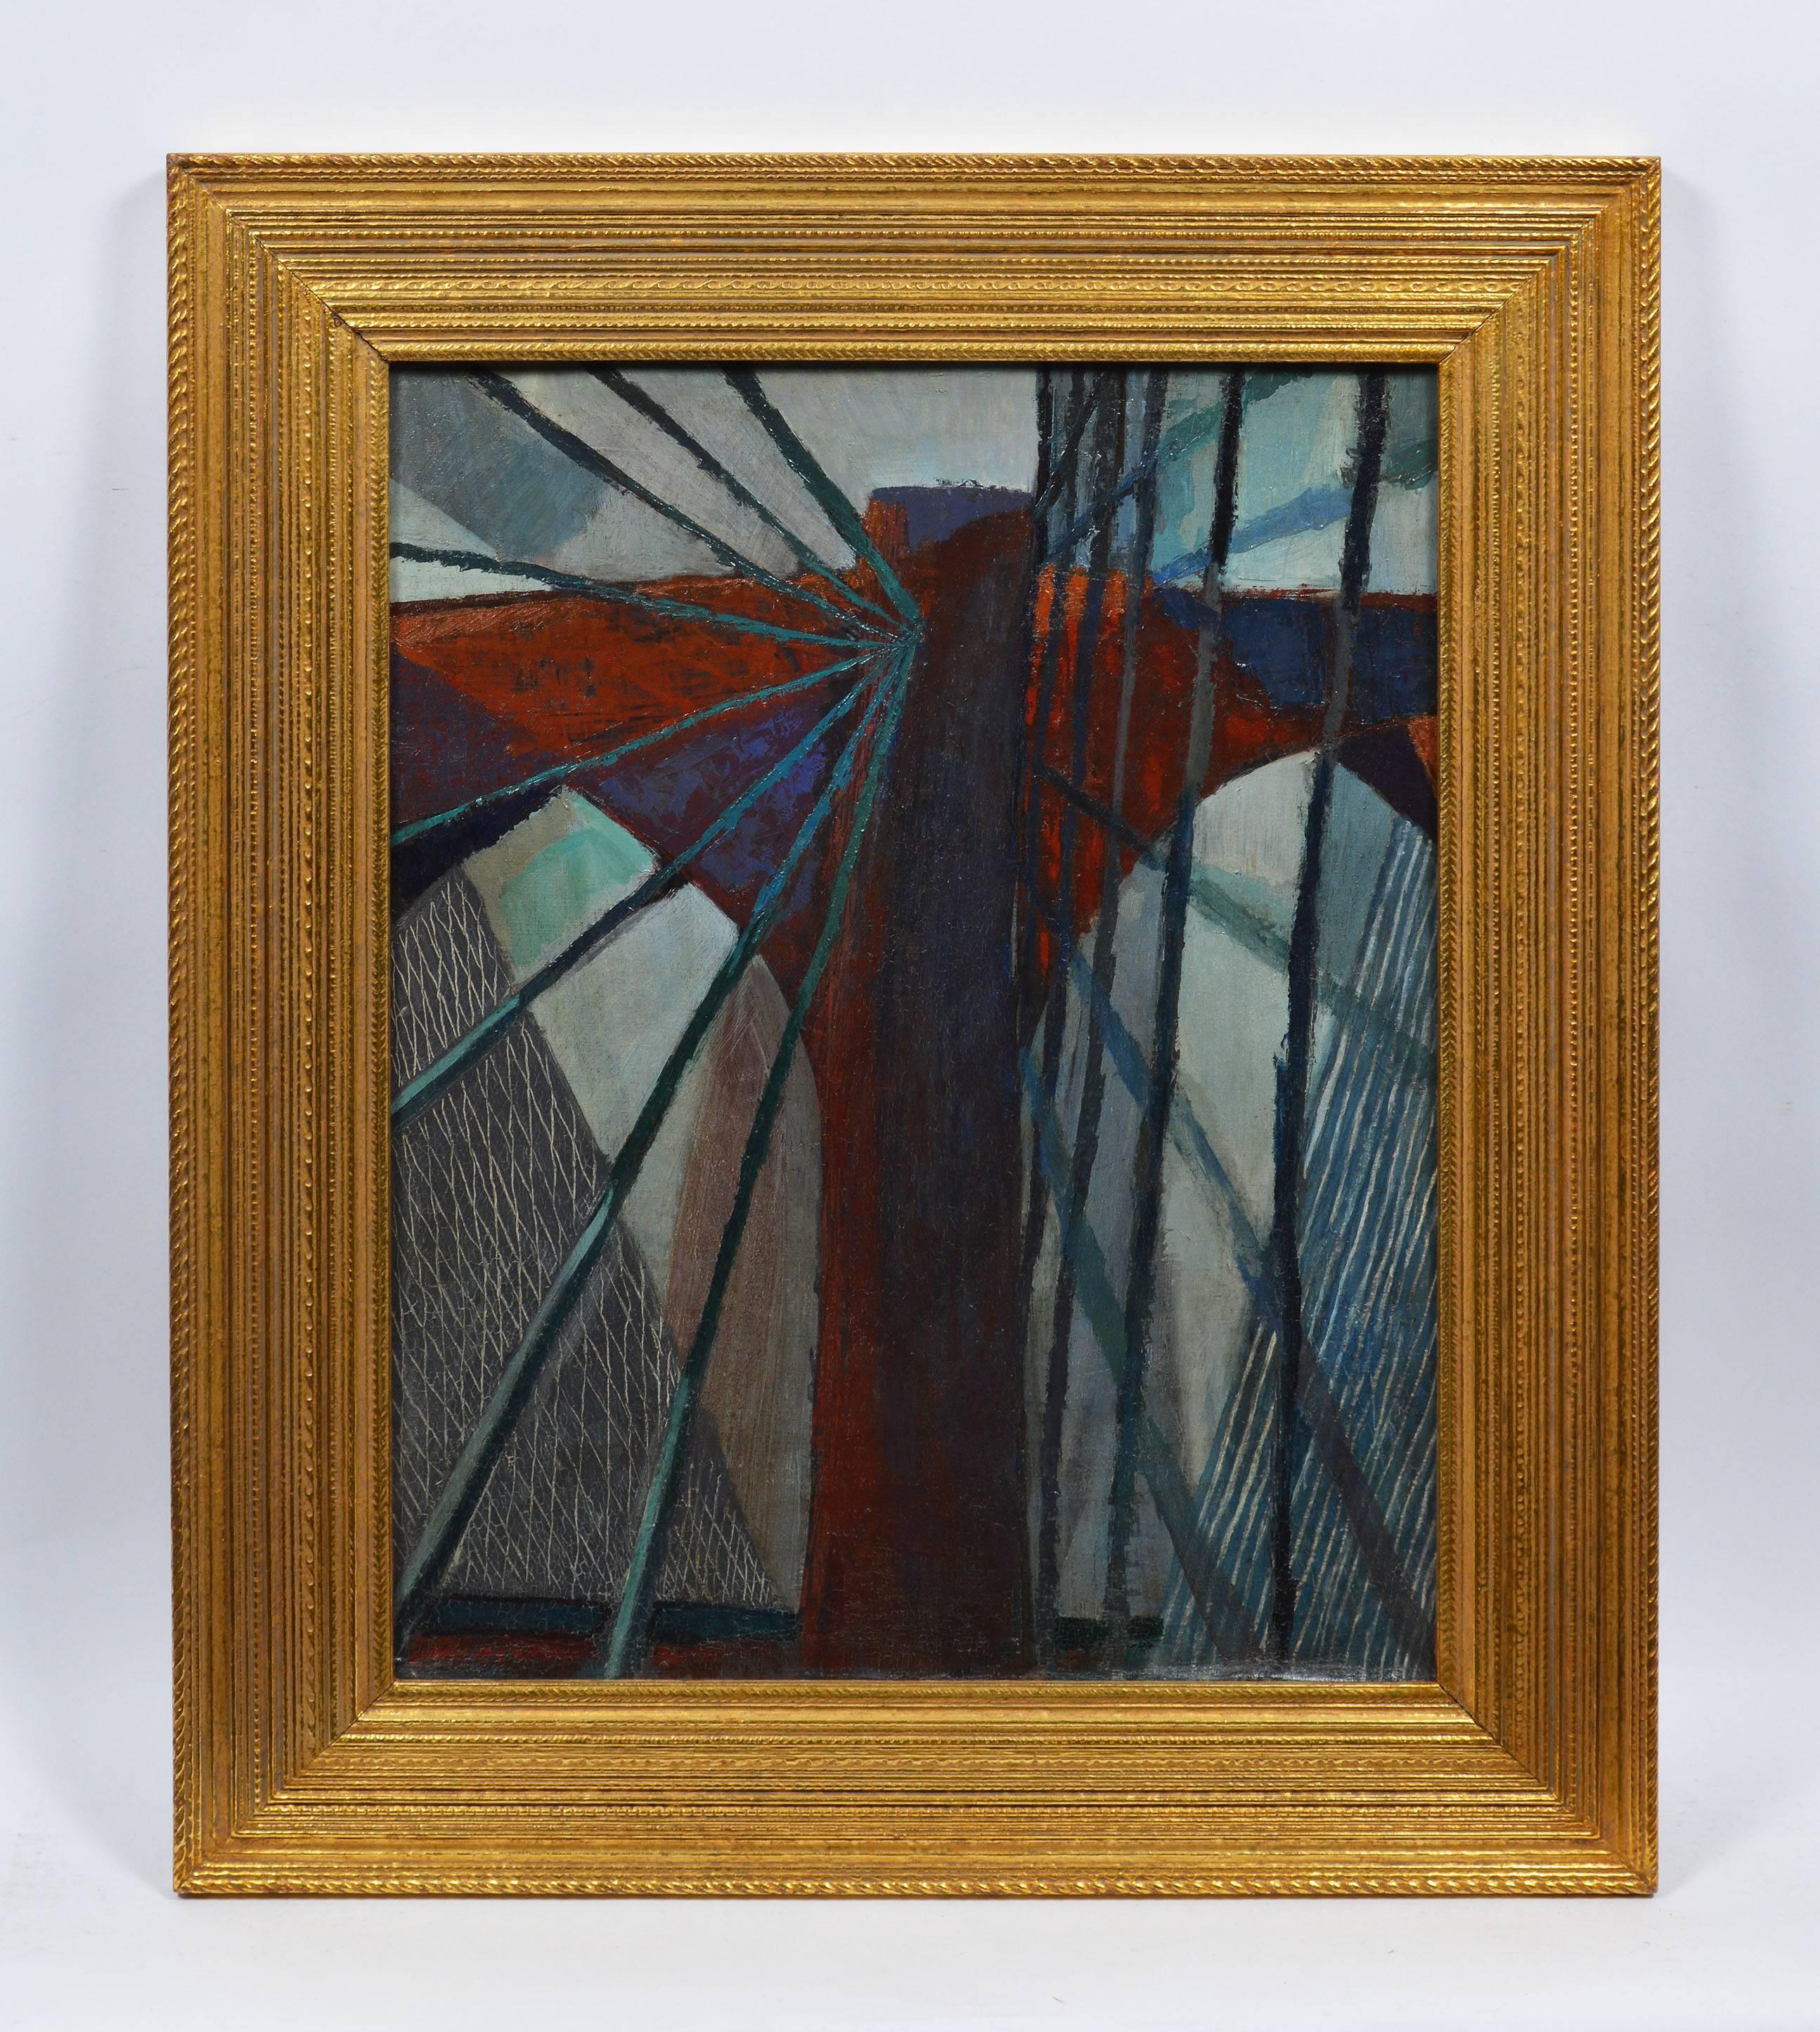 Modernist View of the Brooklyn Bridge - Painting by Alfred Statler